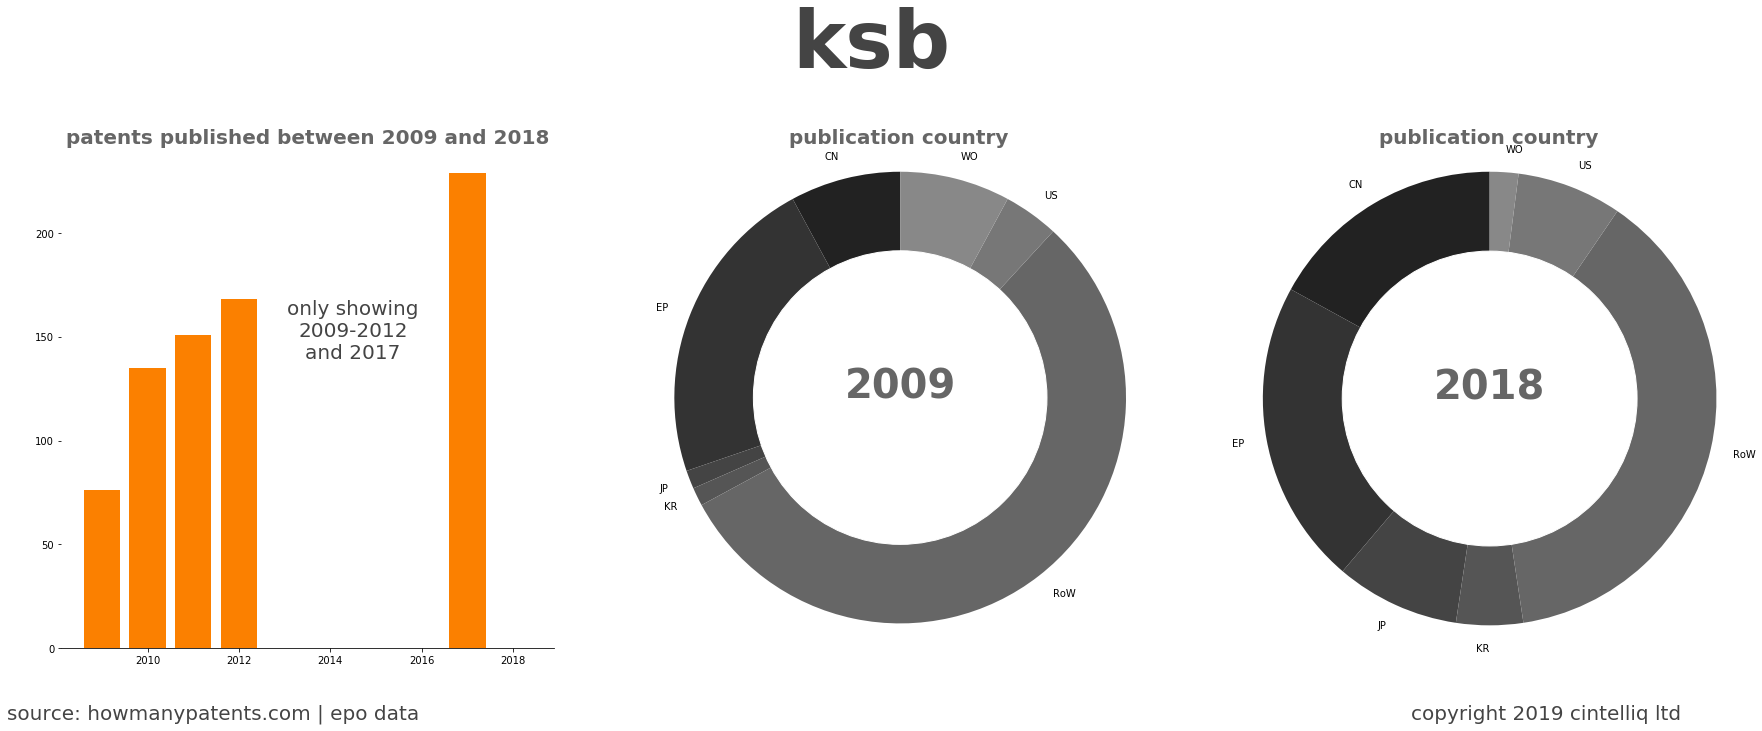 summary of patents for Ksb